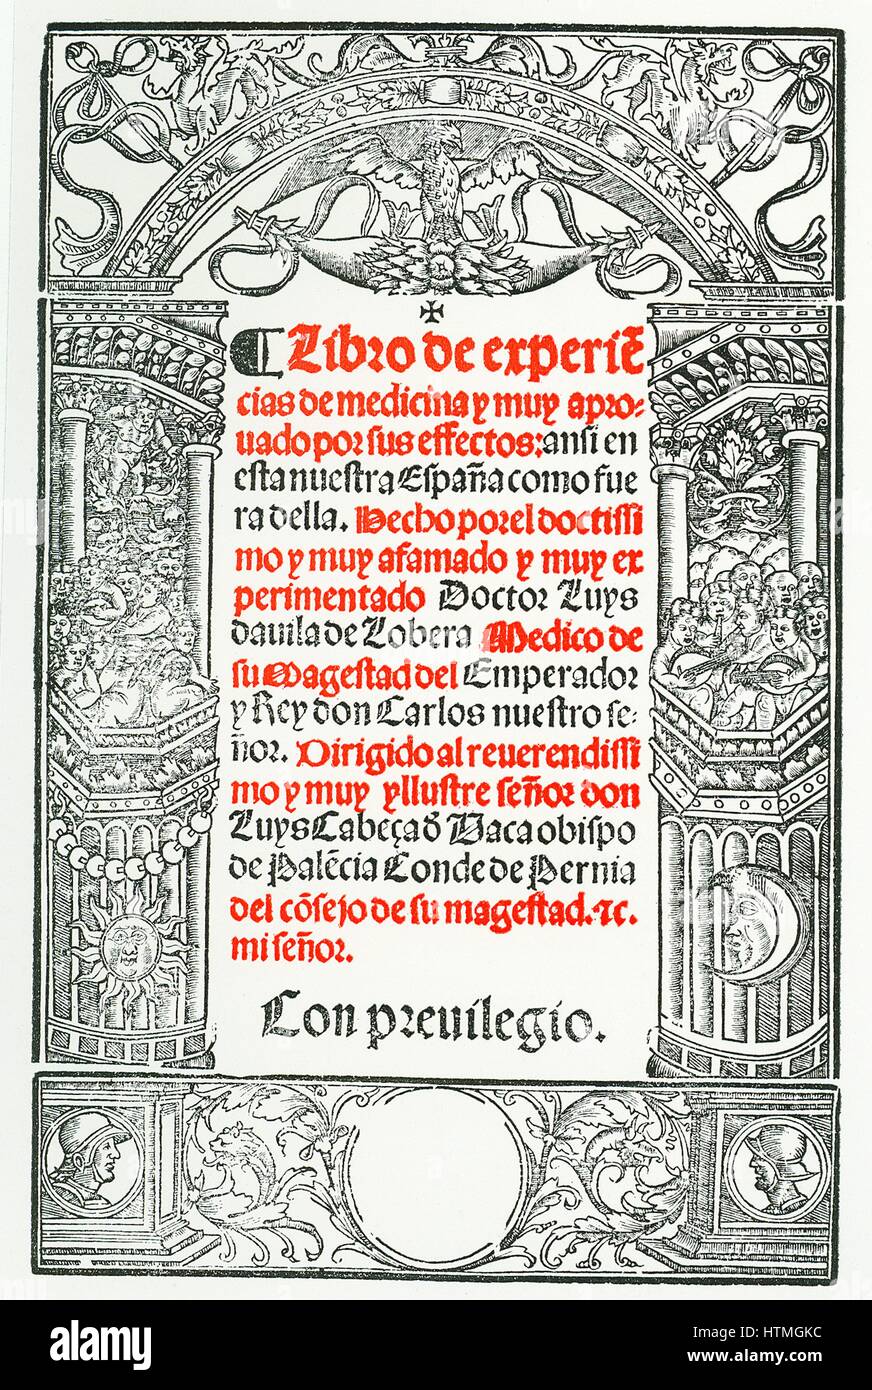 Title page of 'Libro de Experiencias de Medicina', Toledo, 1544, by Luis Lobera de Avila. Born in Avila in the late 15th century, Lobera was physician to the Holy Roman Emperor Charles V whom he accompanied on his expeditions abroad. Stock Photo